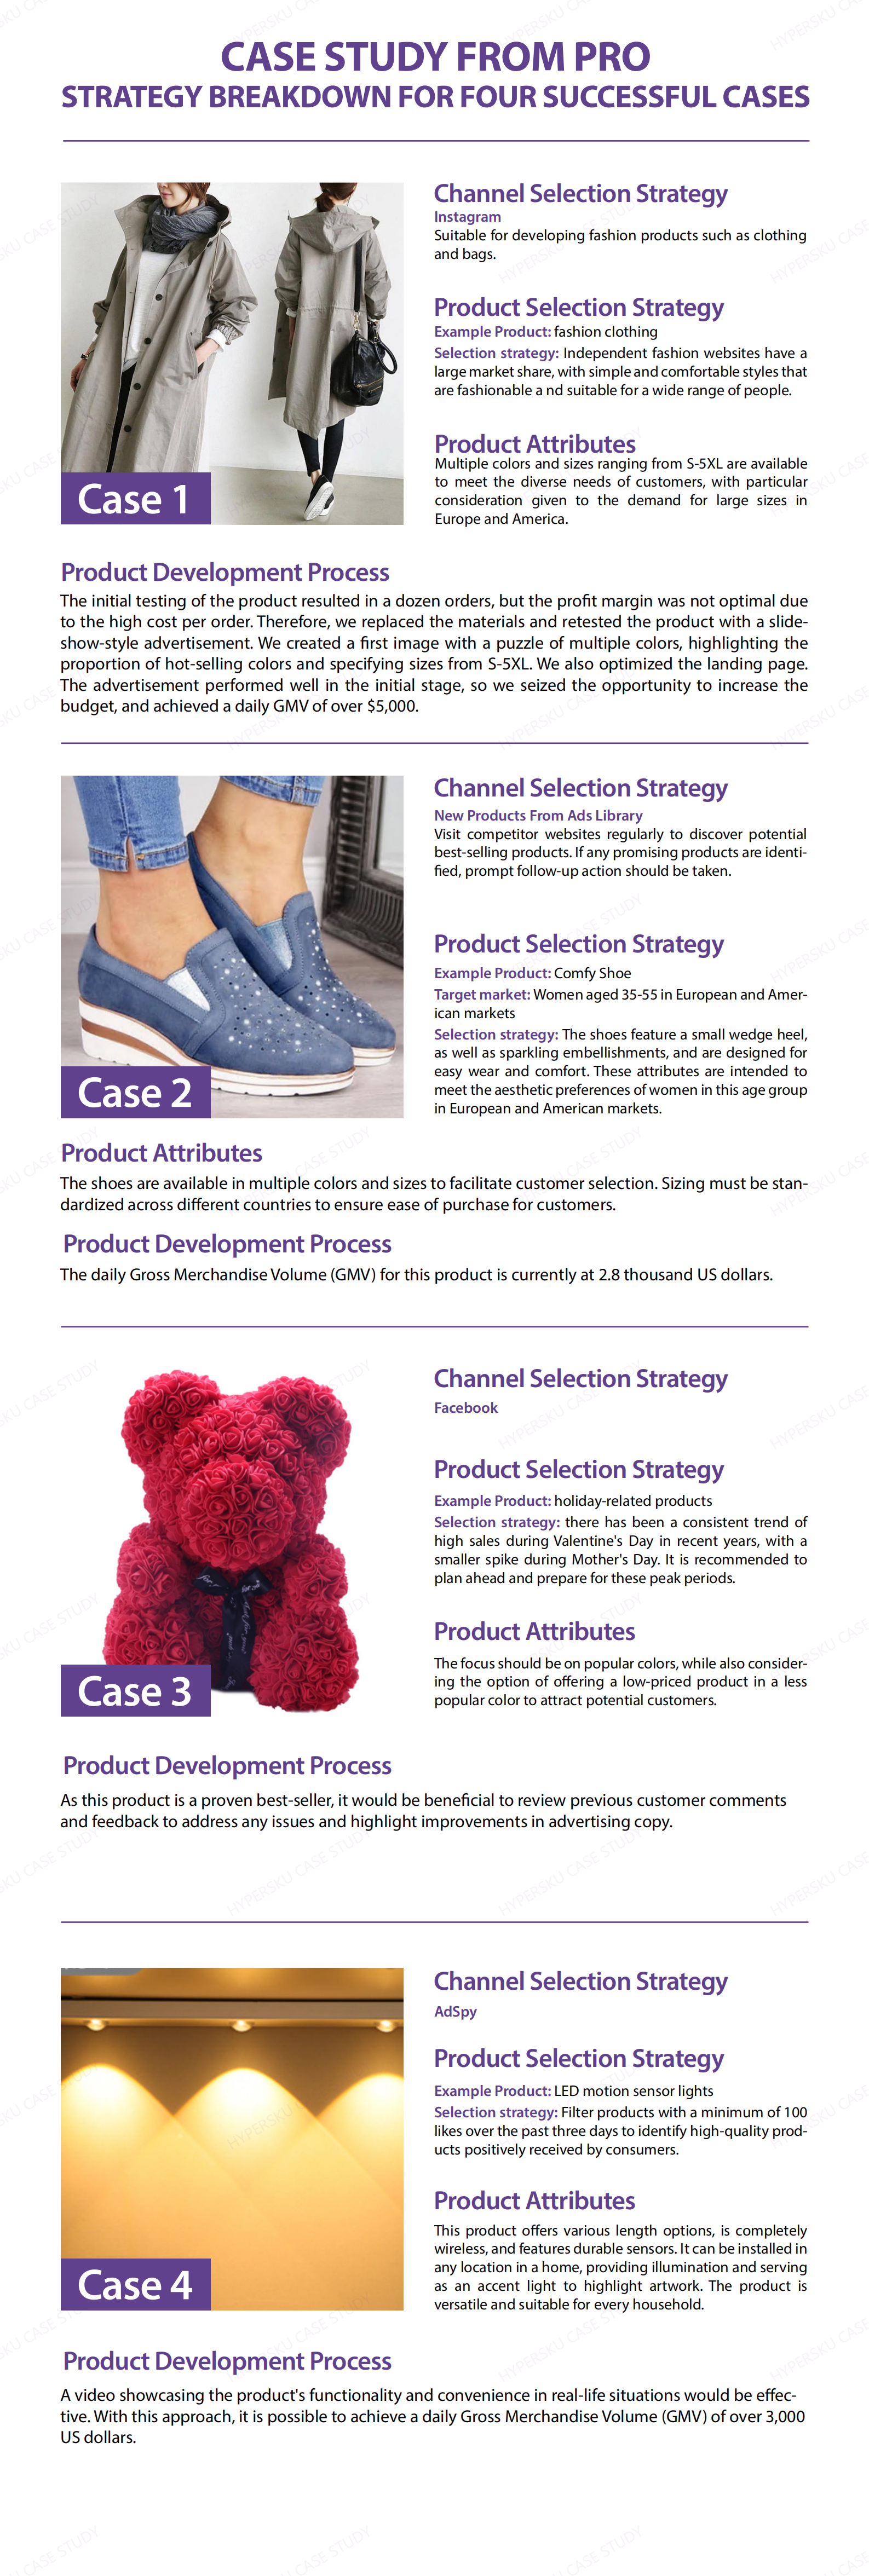 HYPERSKU Case Study-Sourcing & Selection Strategies For Winning Products